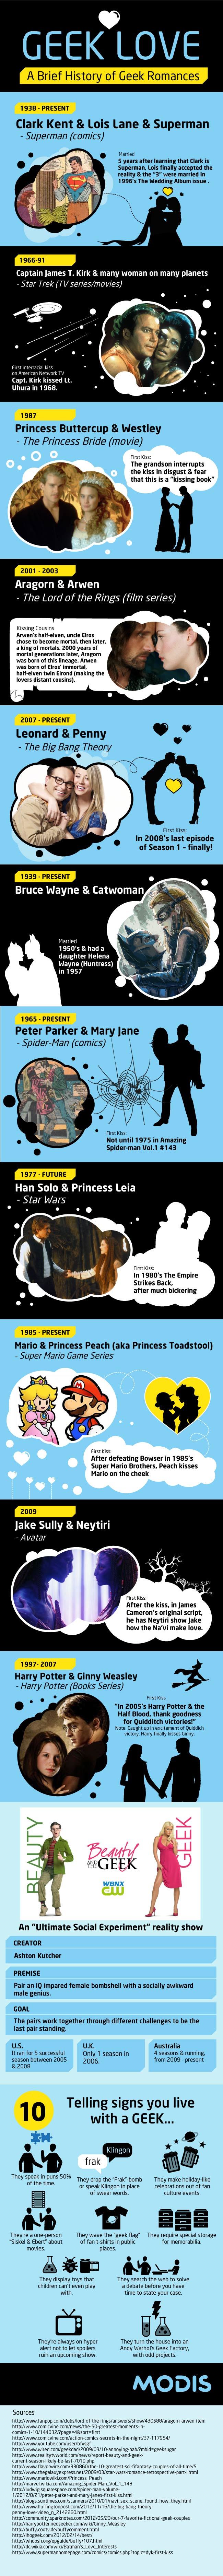 Geek Love: A Brief History of Geek Romances Infographic